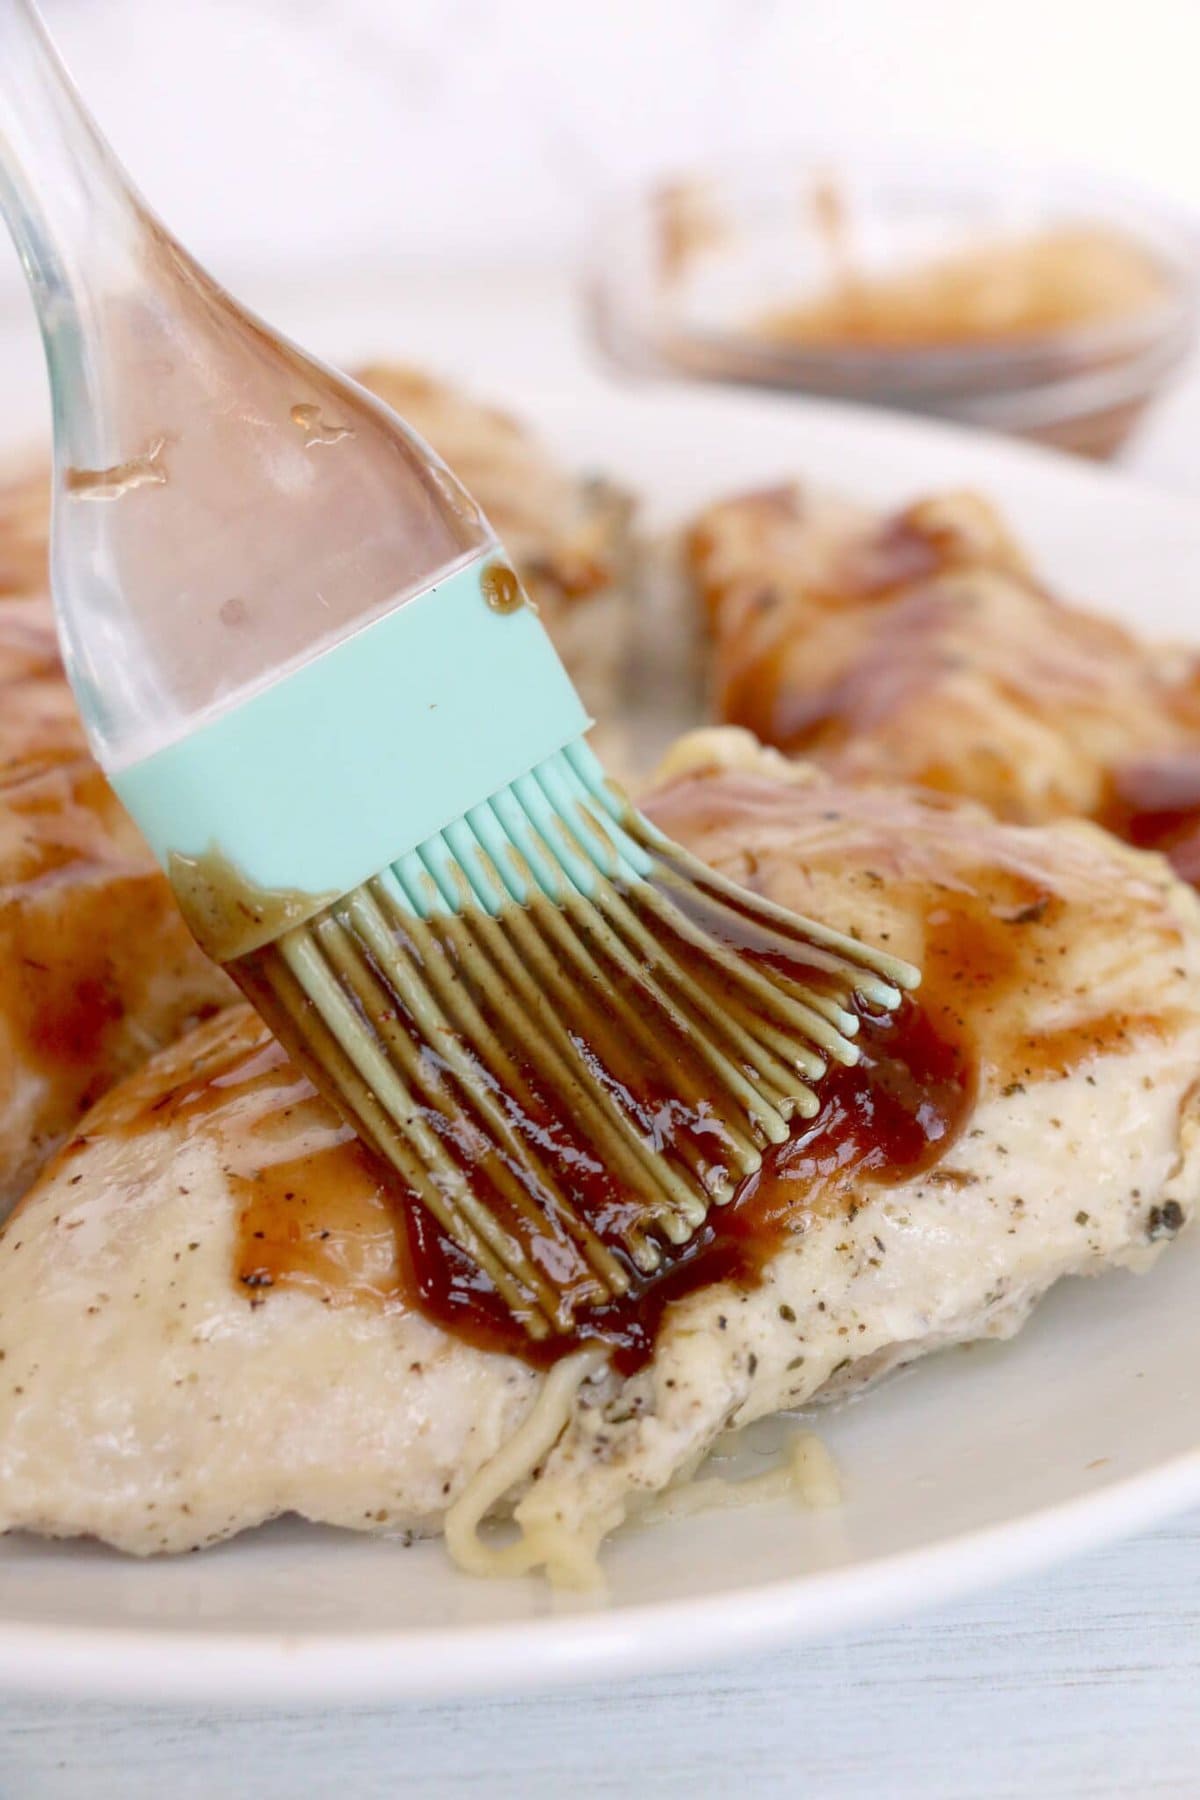 Brushing the chicken with BBQ sauce.